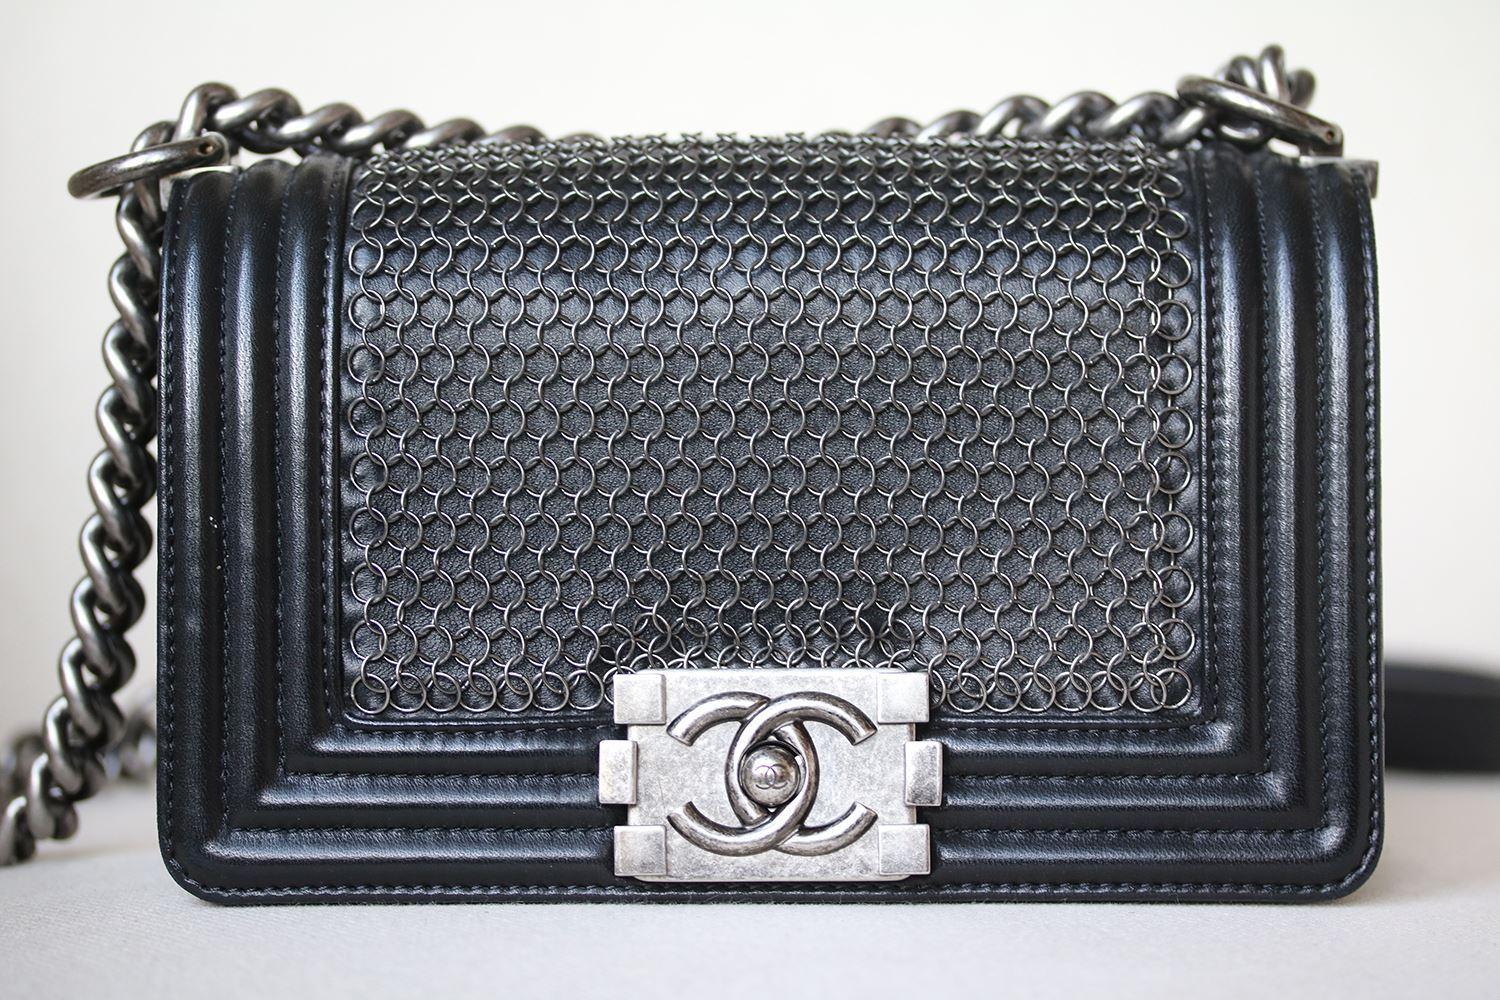 Chanel Lambskin Quilted Small Chain Mail Boy Flap Black. This chic baguette is crafted of small thin chains on the lambskin leather with a structured rectangular silhouette. The bag features an aged silver chain link shoulder strap with a leather